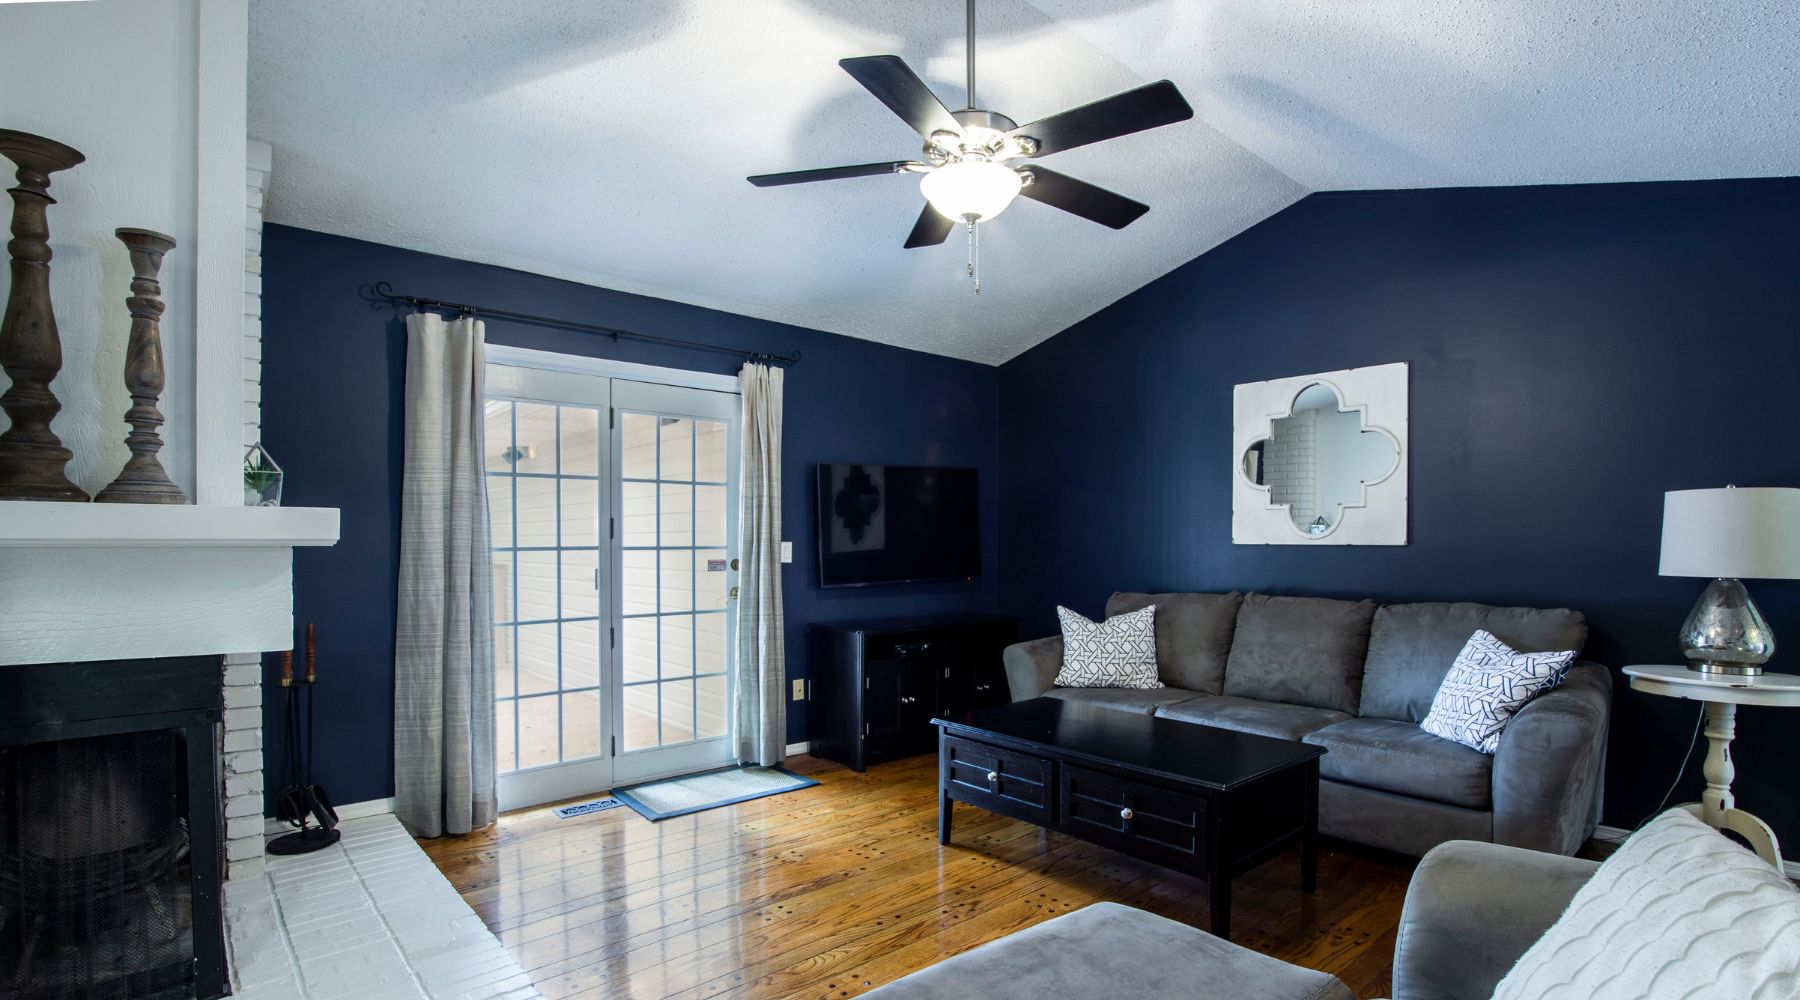 How Ceiling Fans Can Help Reduce Winter Energy Bills